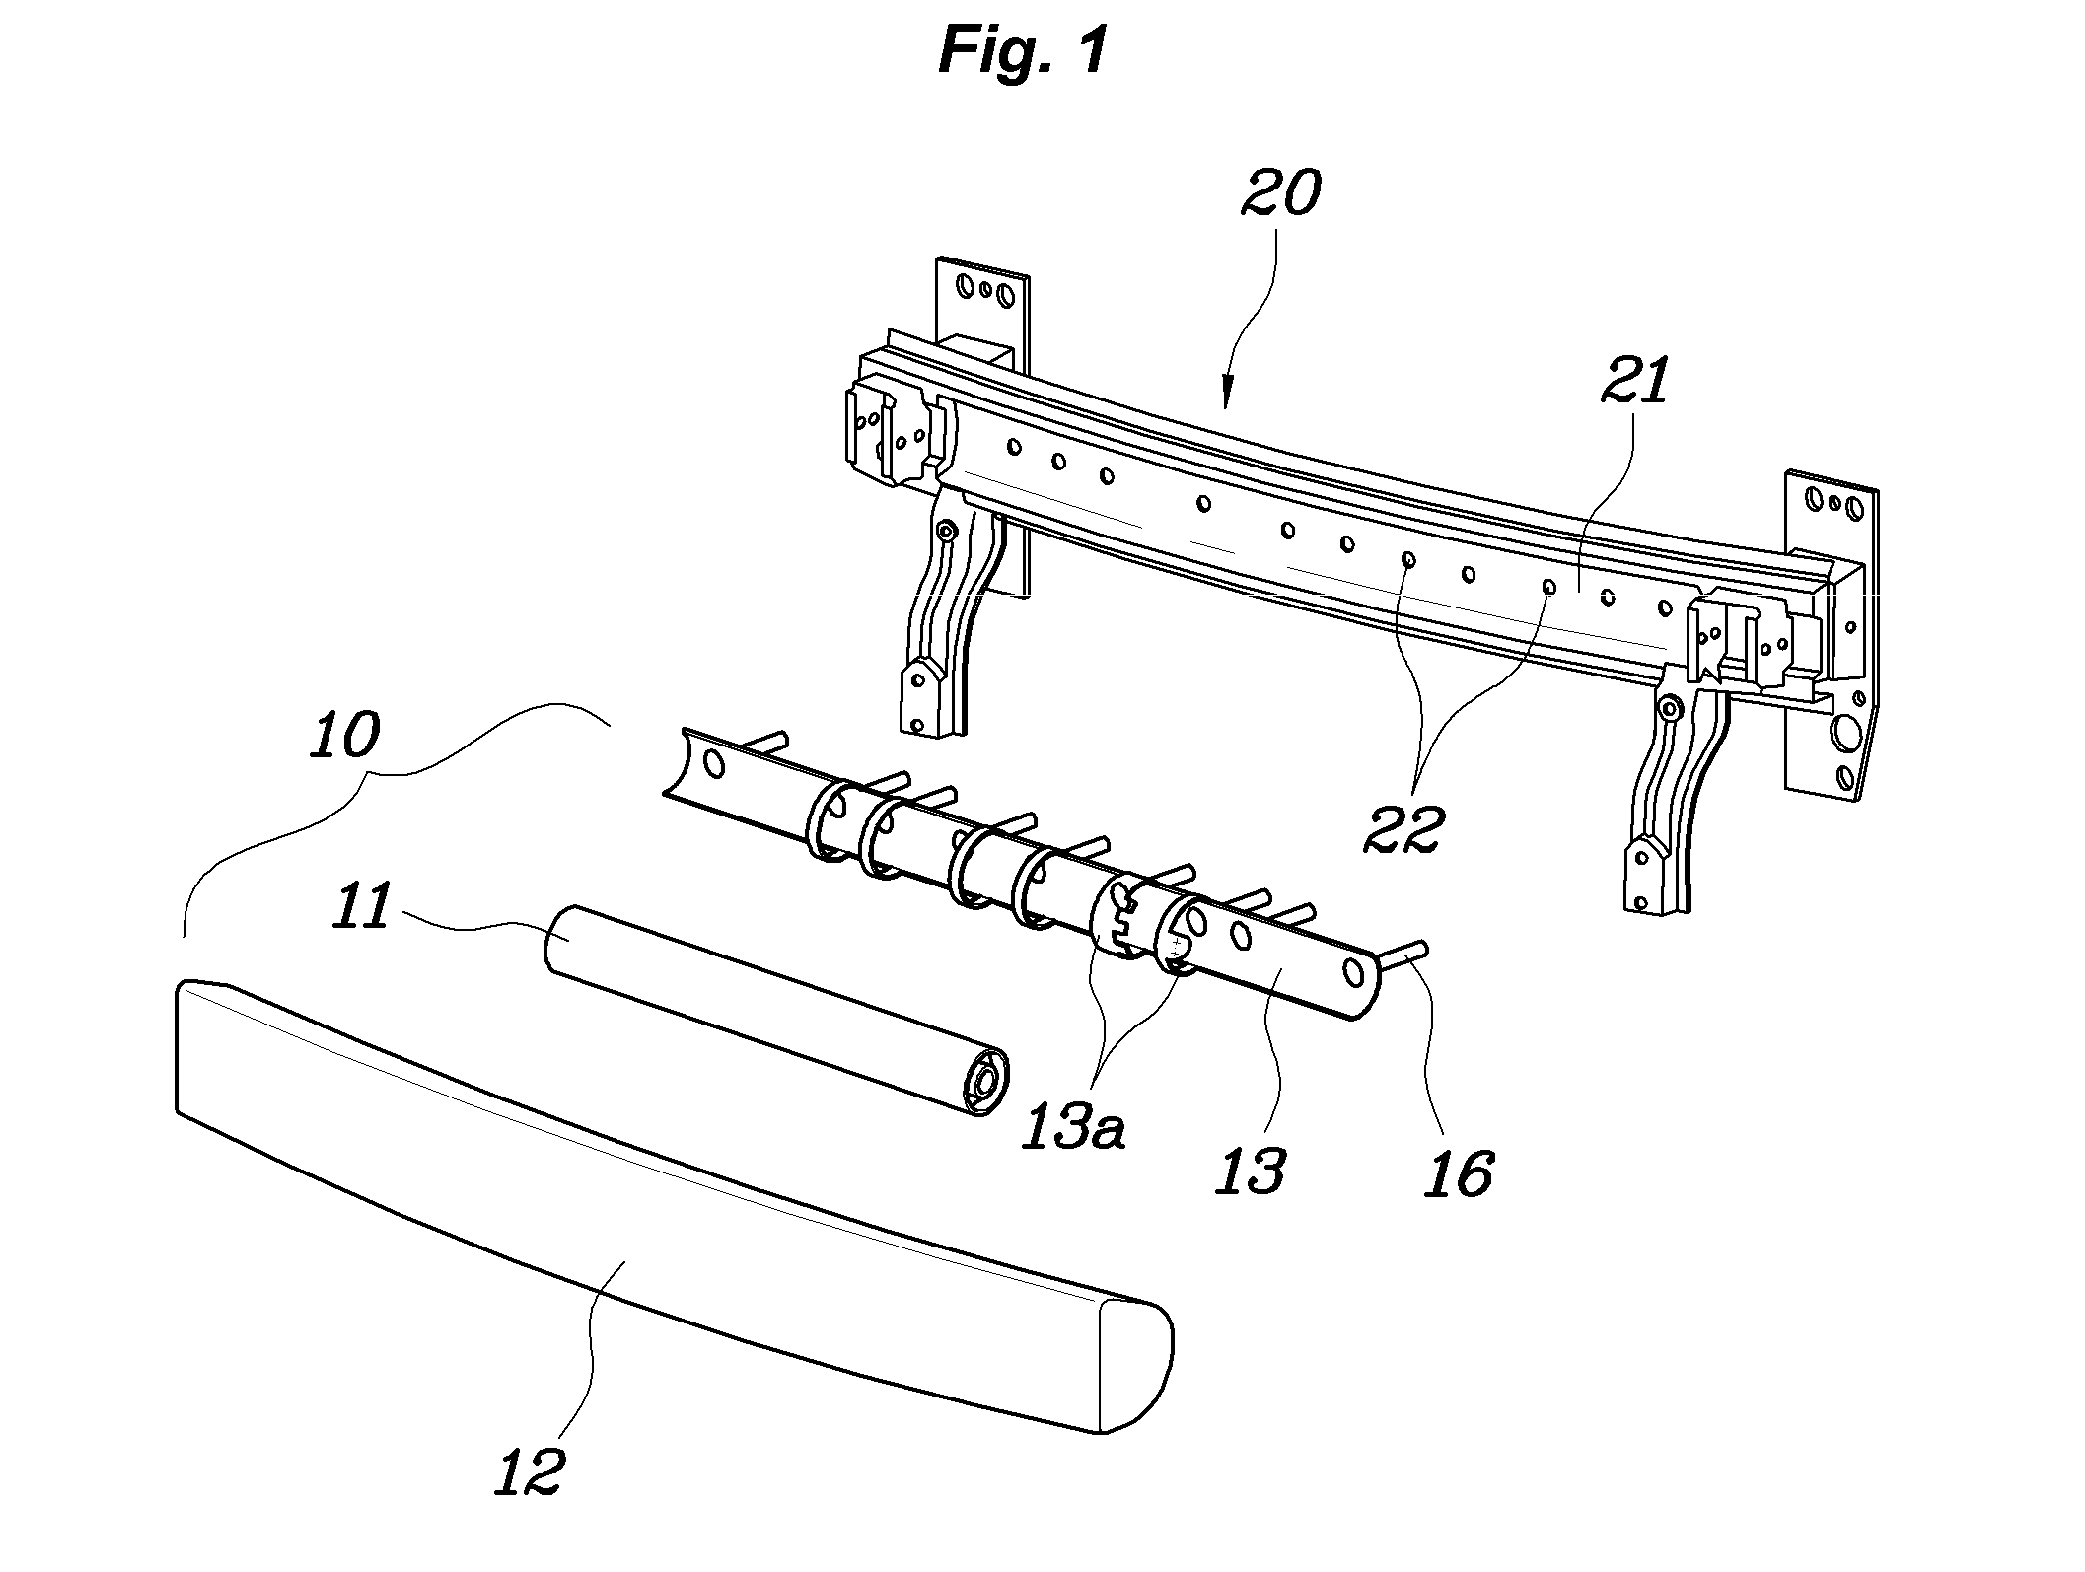 External airbag module for vehicle and back beam for mounting external airbag module